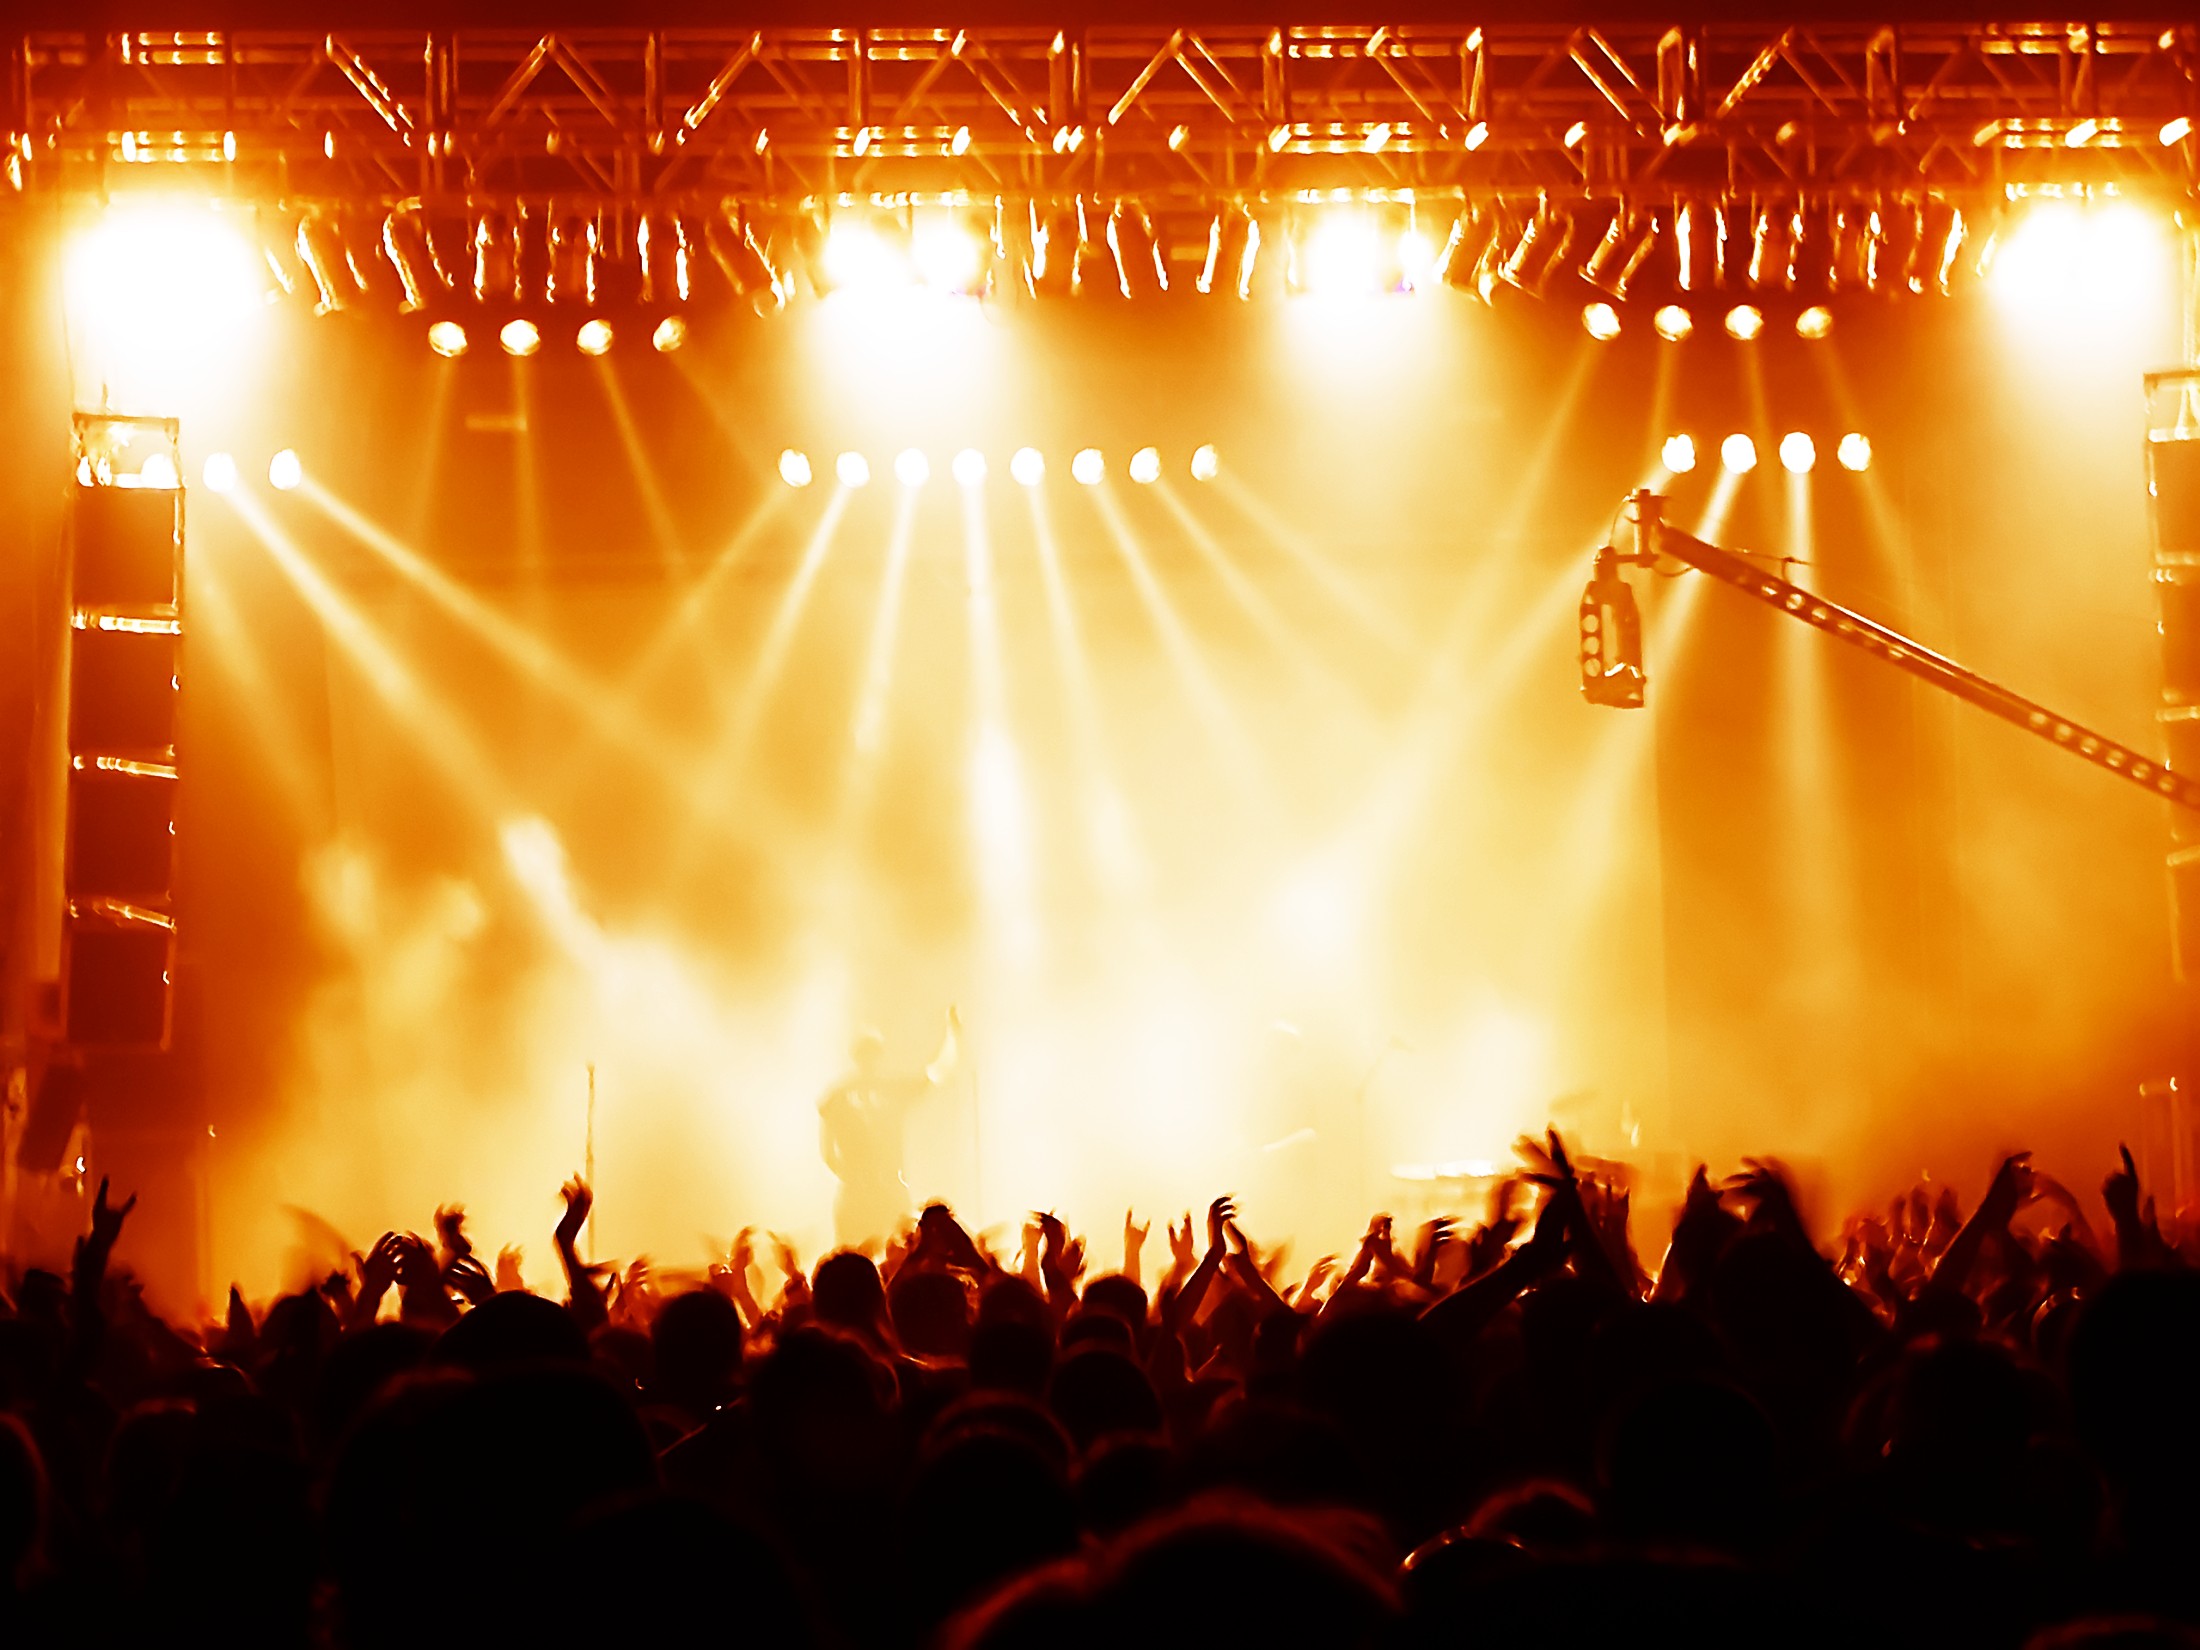  Concert  background   Download free cool full HD 